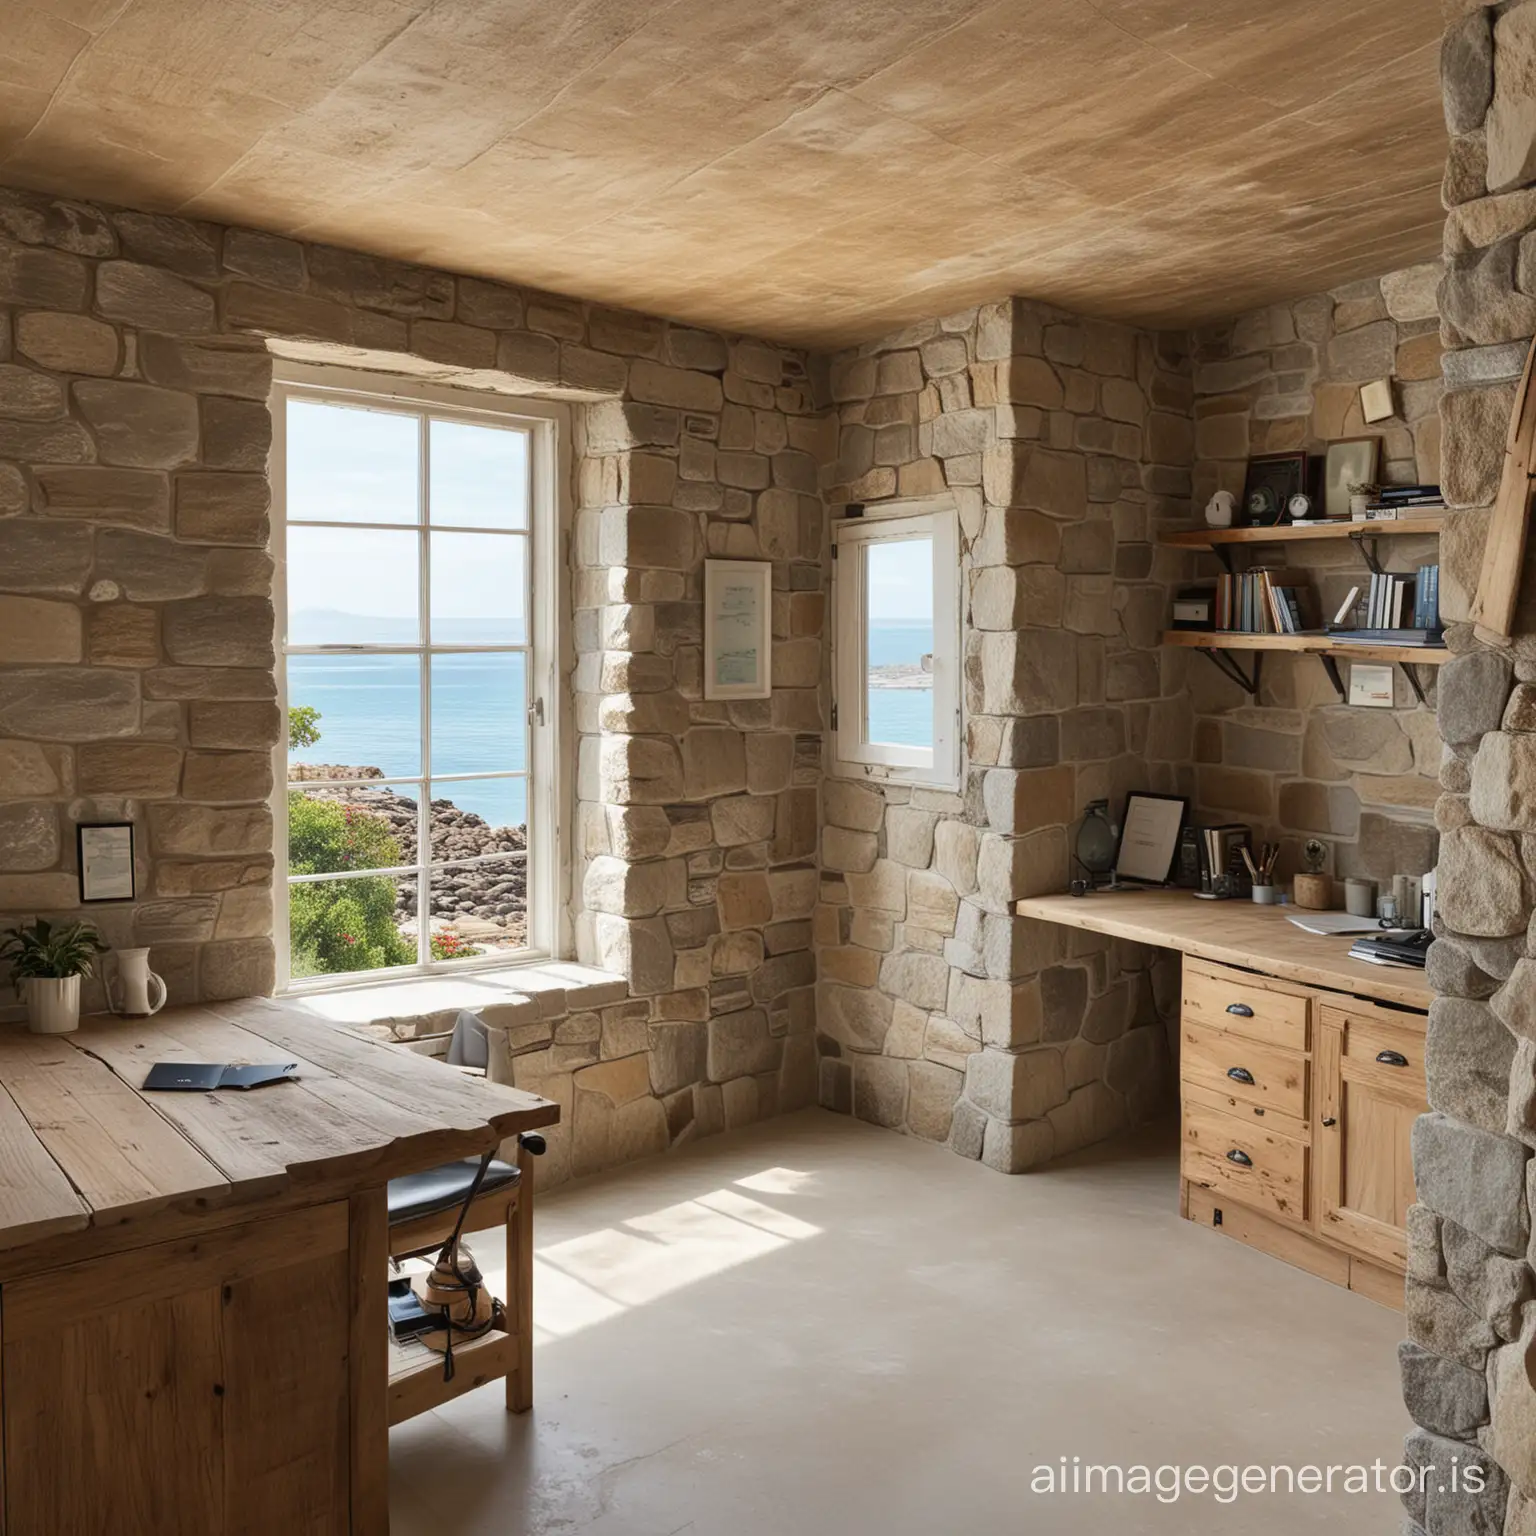 Rustic 160 square foot office in a stone sea cottage with a small long window on only one wall looking out towards the sea